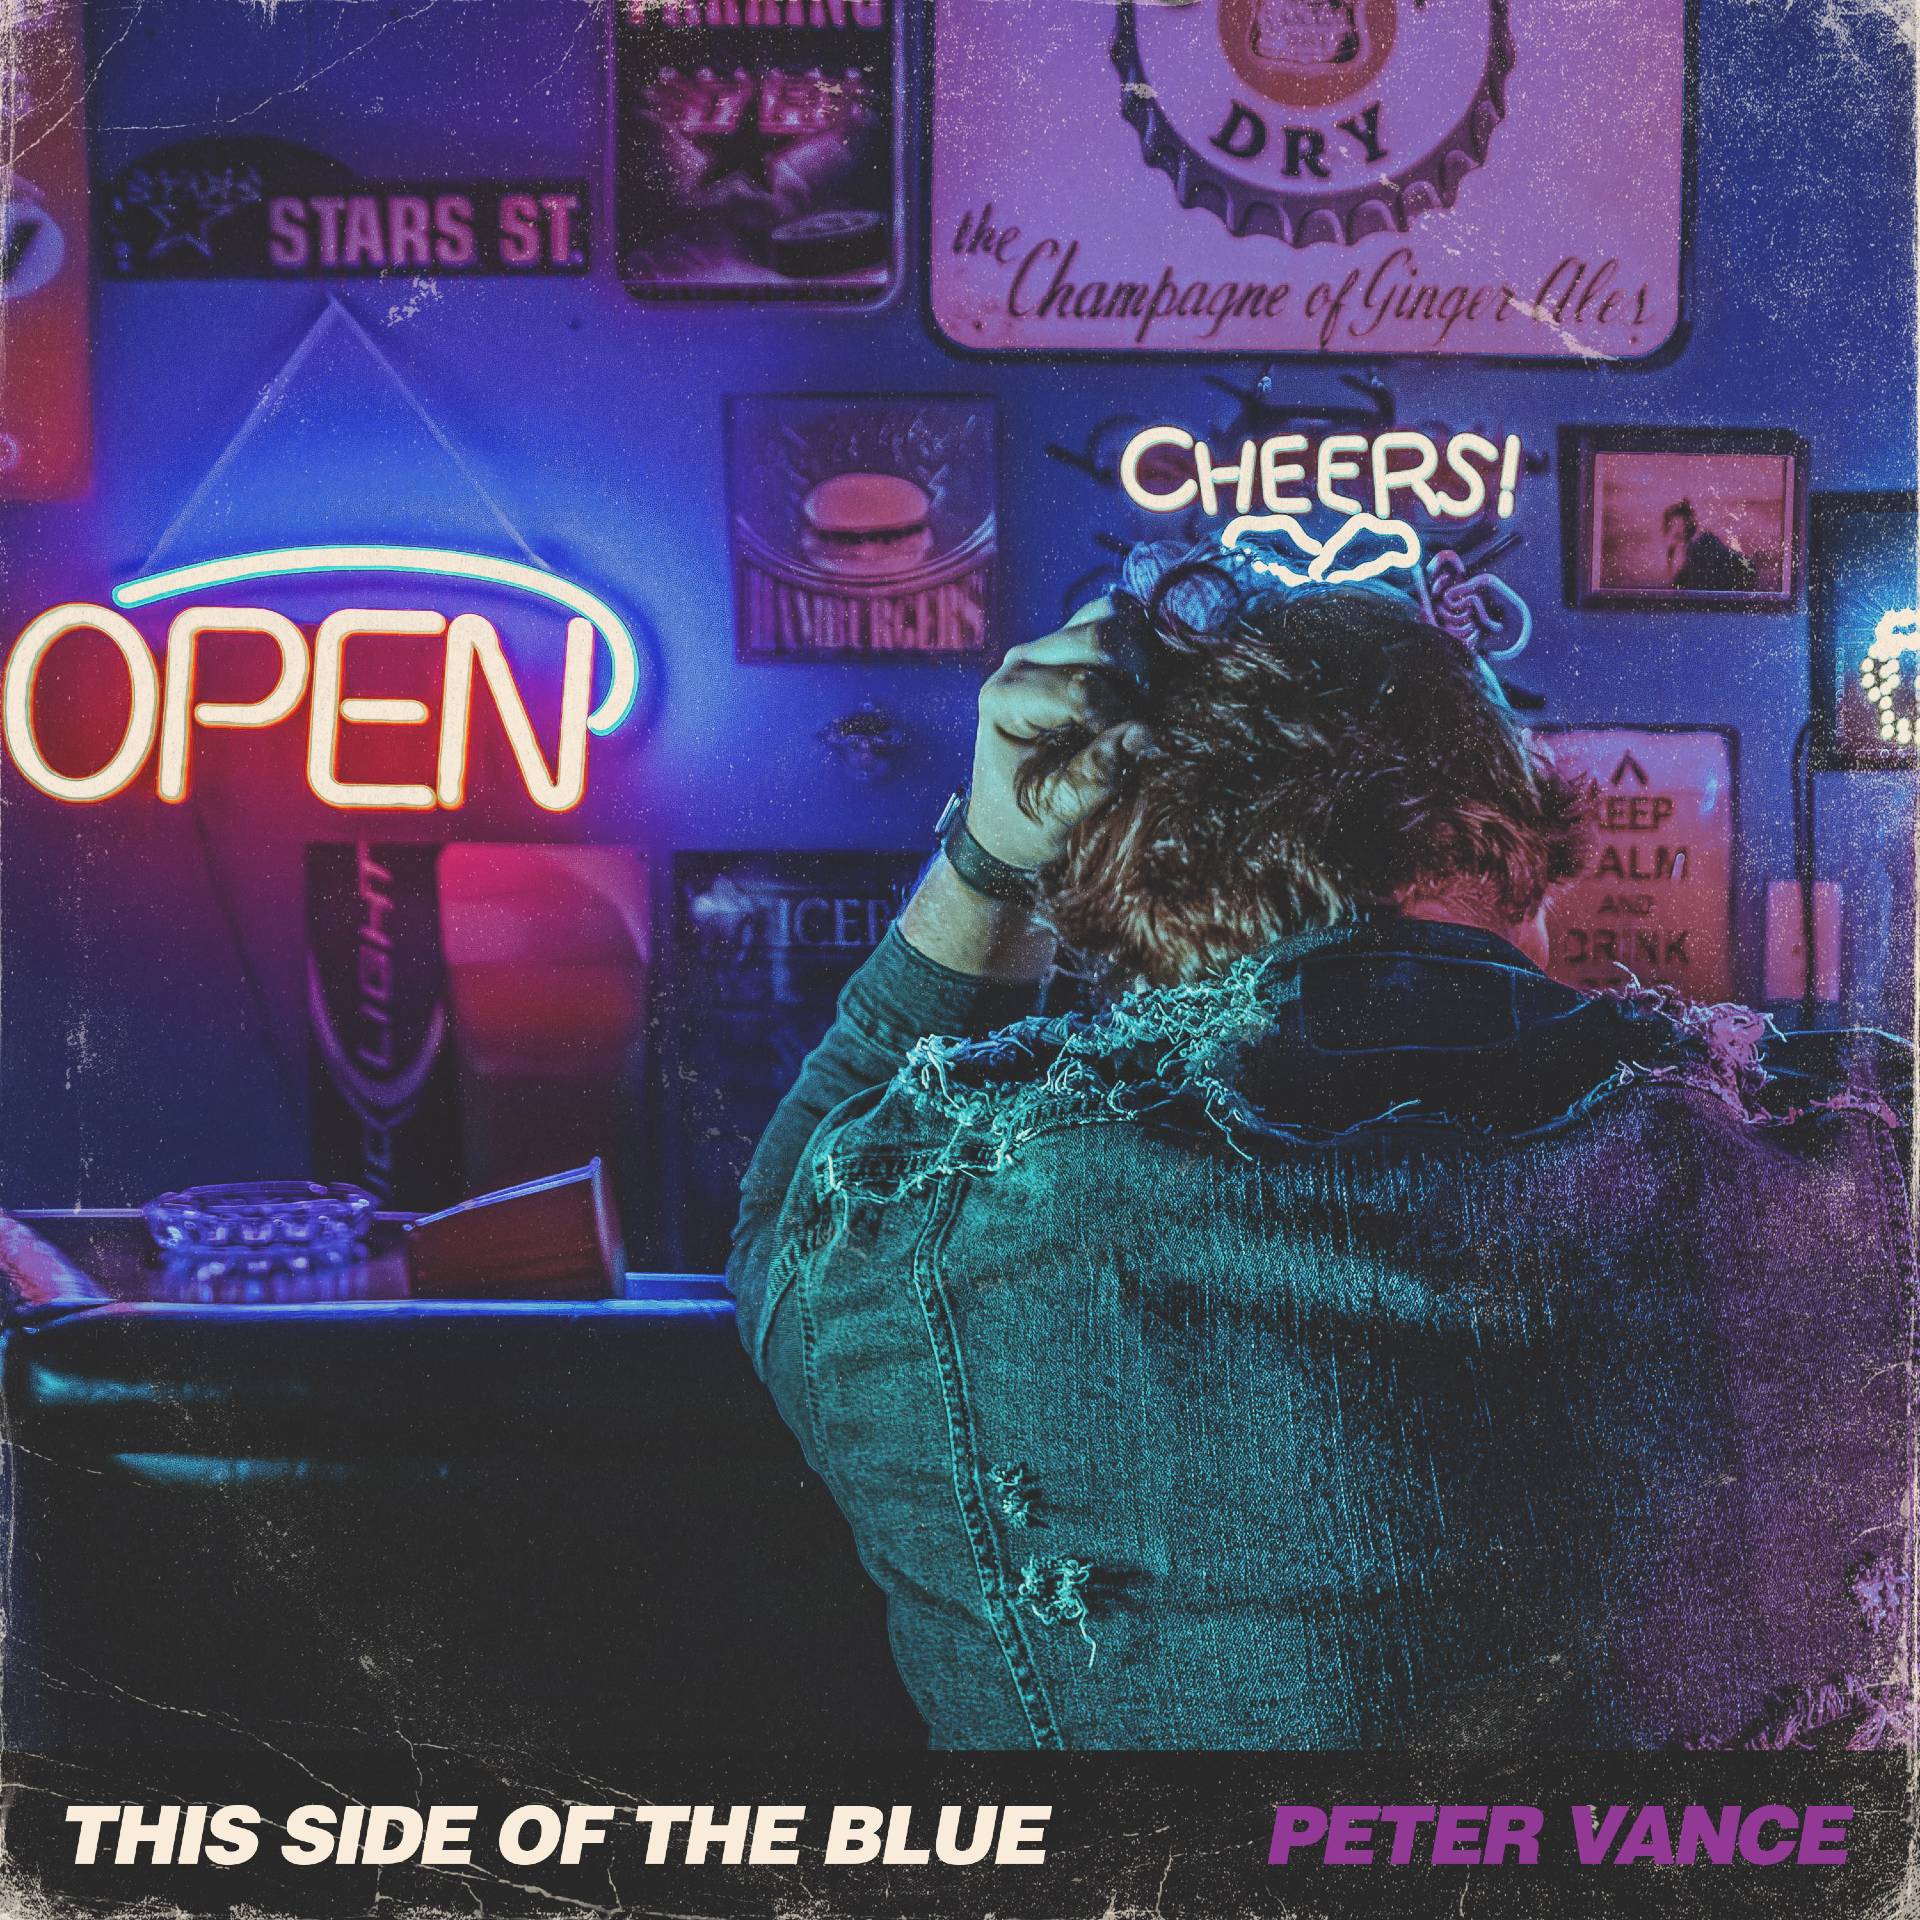 Peter Vance “This Side of the Blue” single artwork